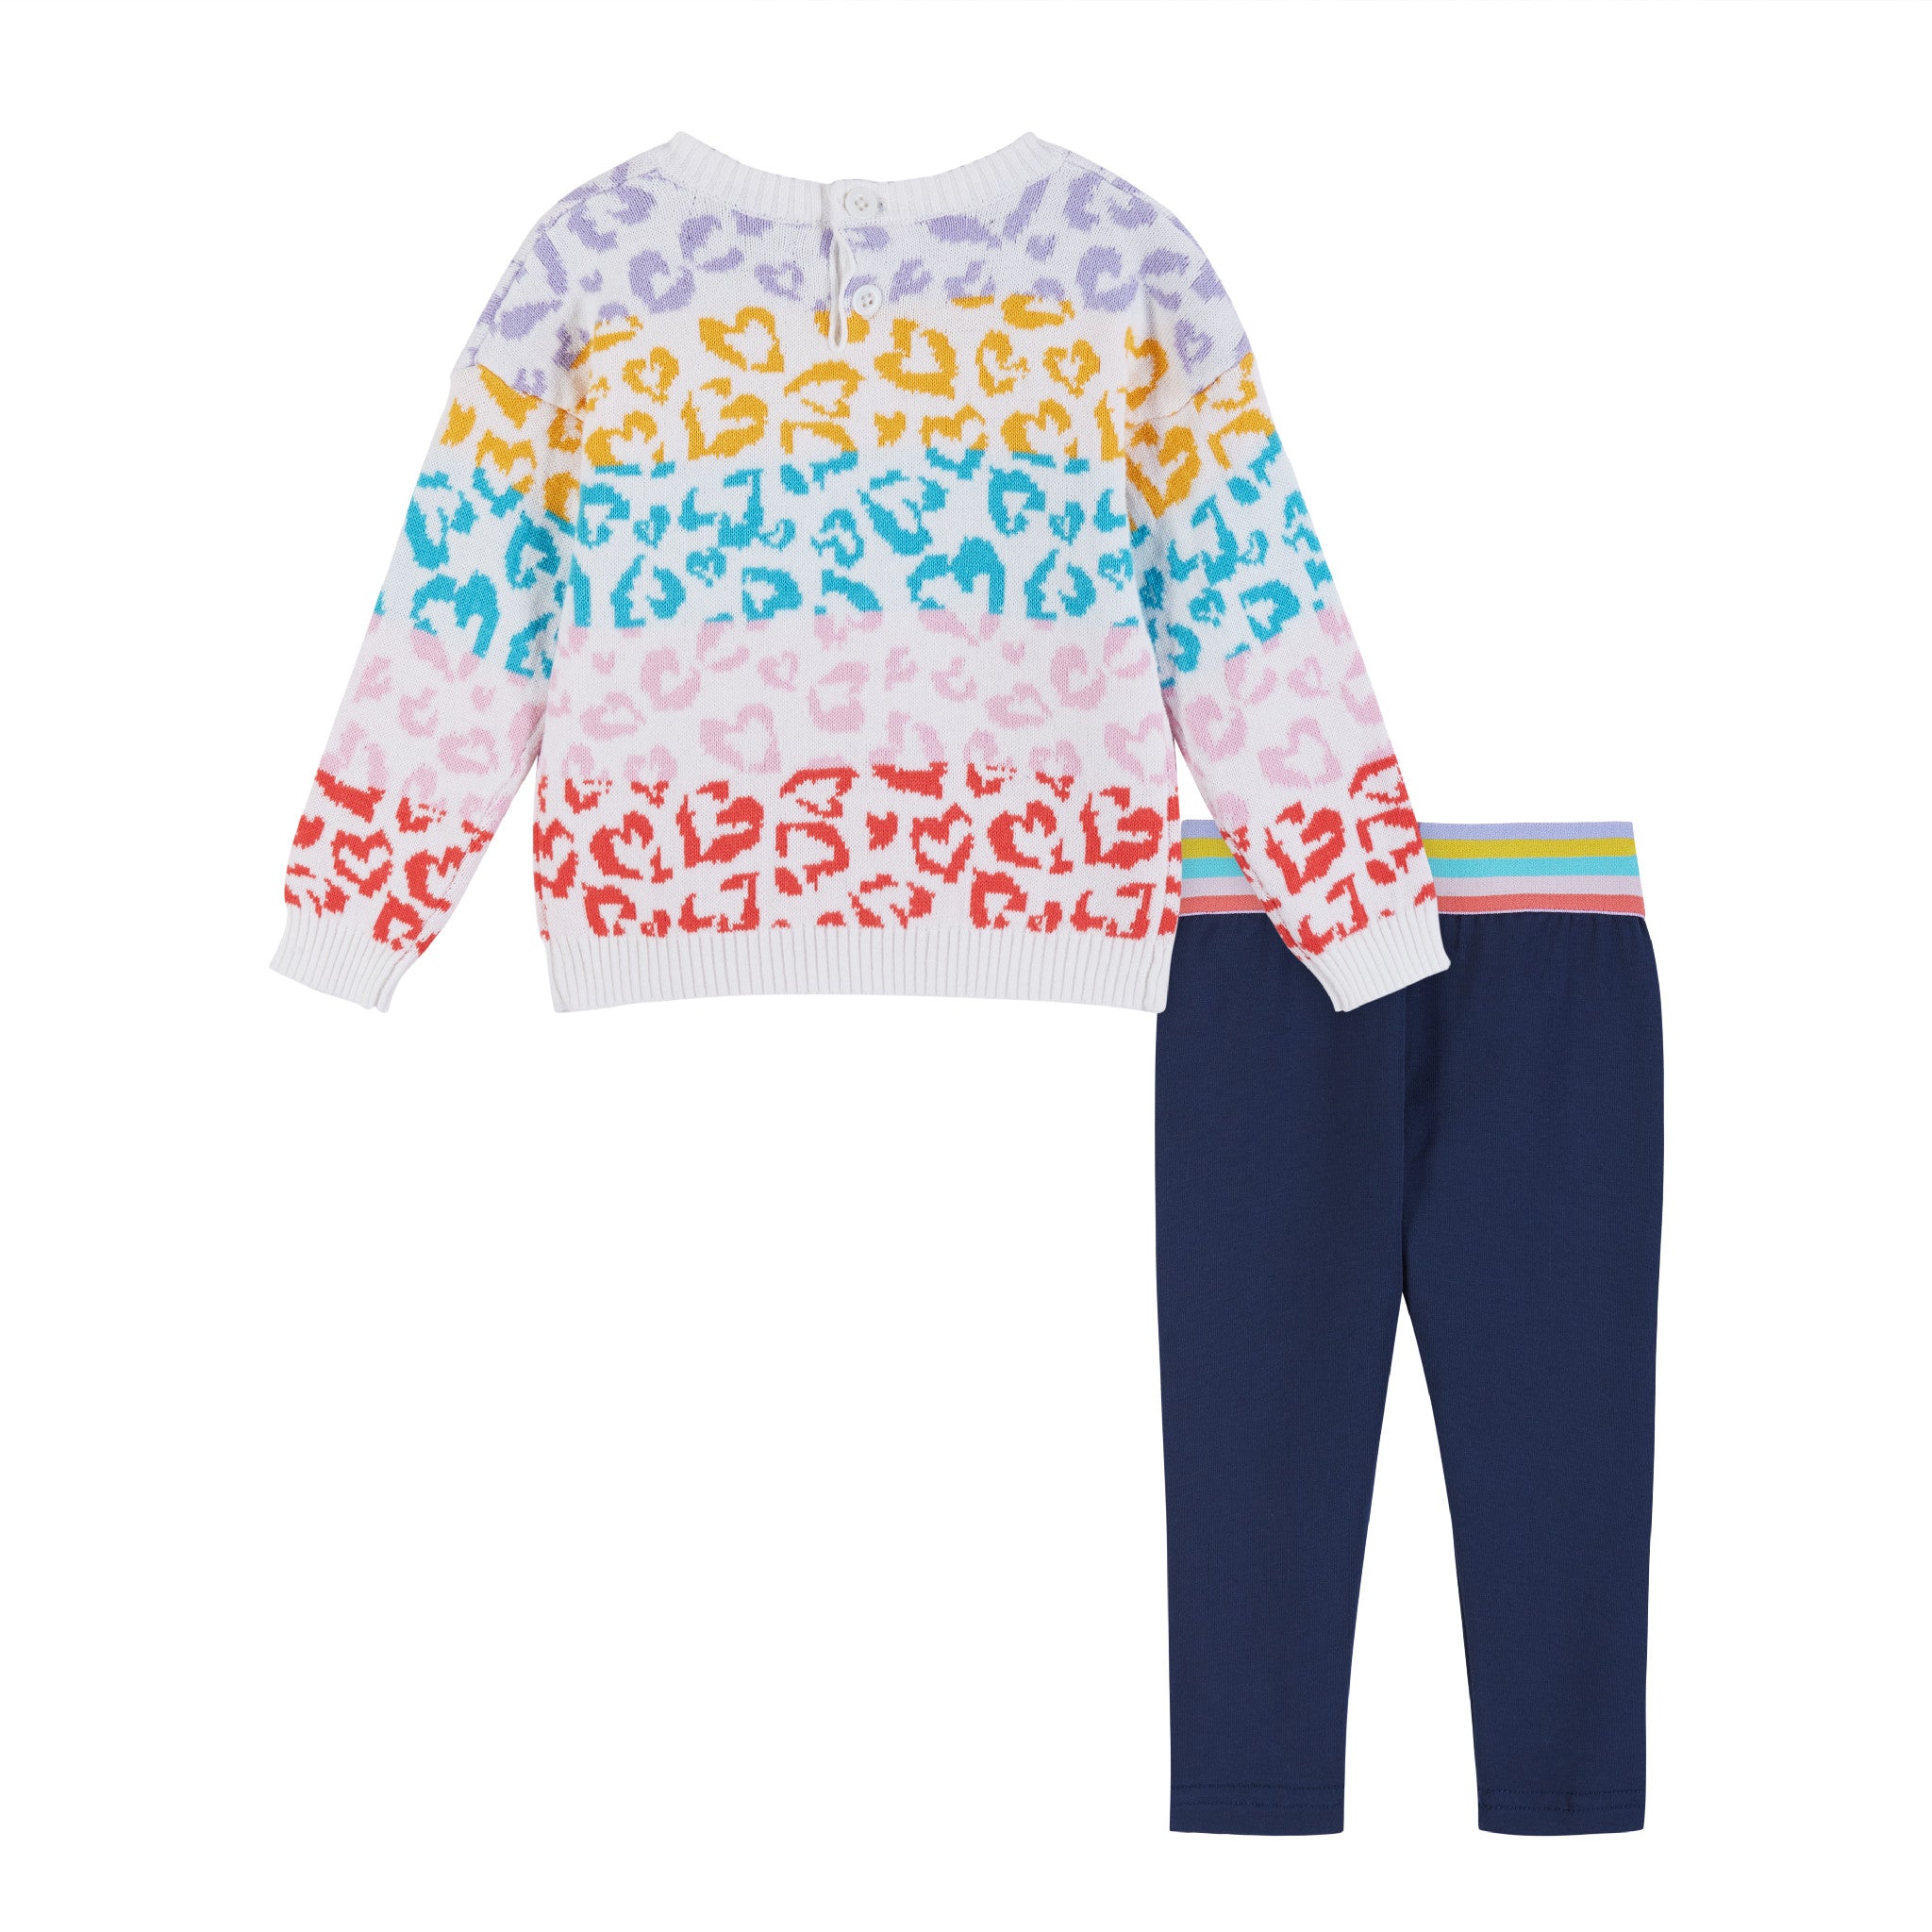 Andy & Evan Colorful Hearts Sweater Set - little birdies